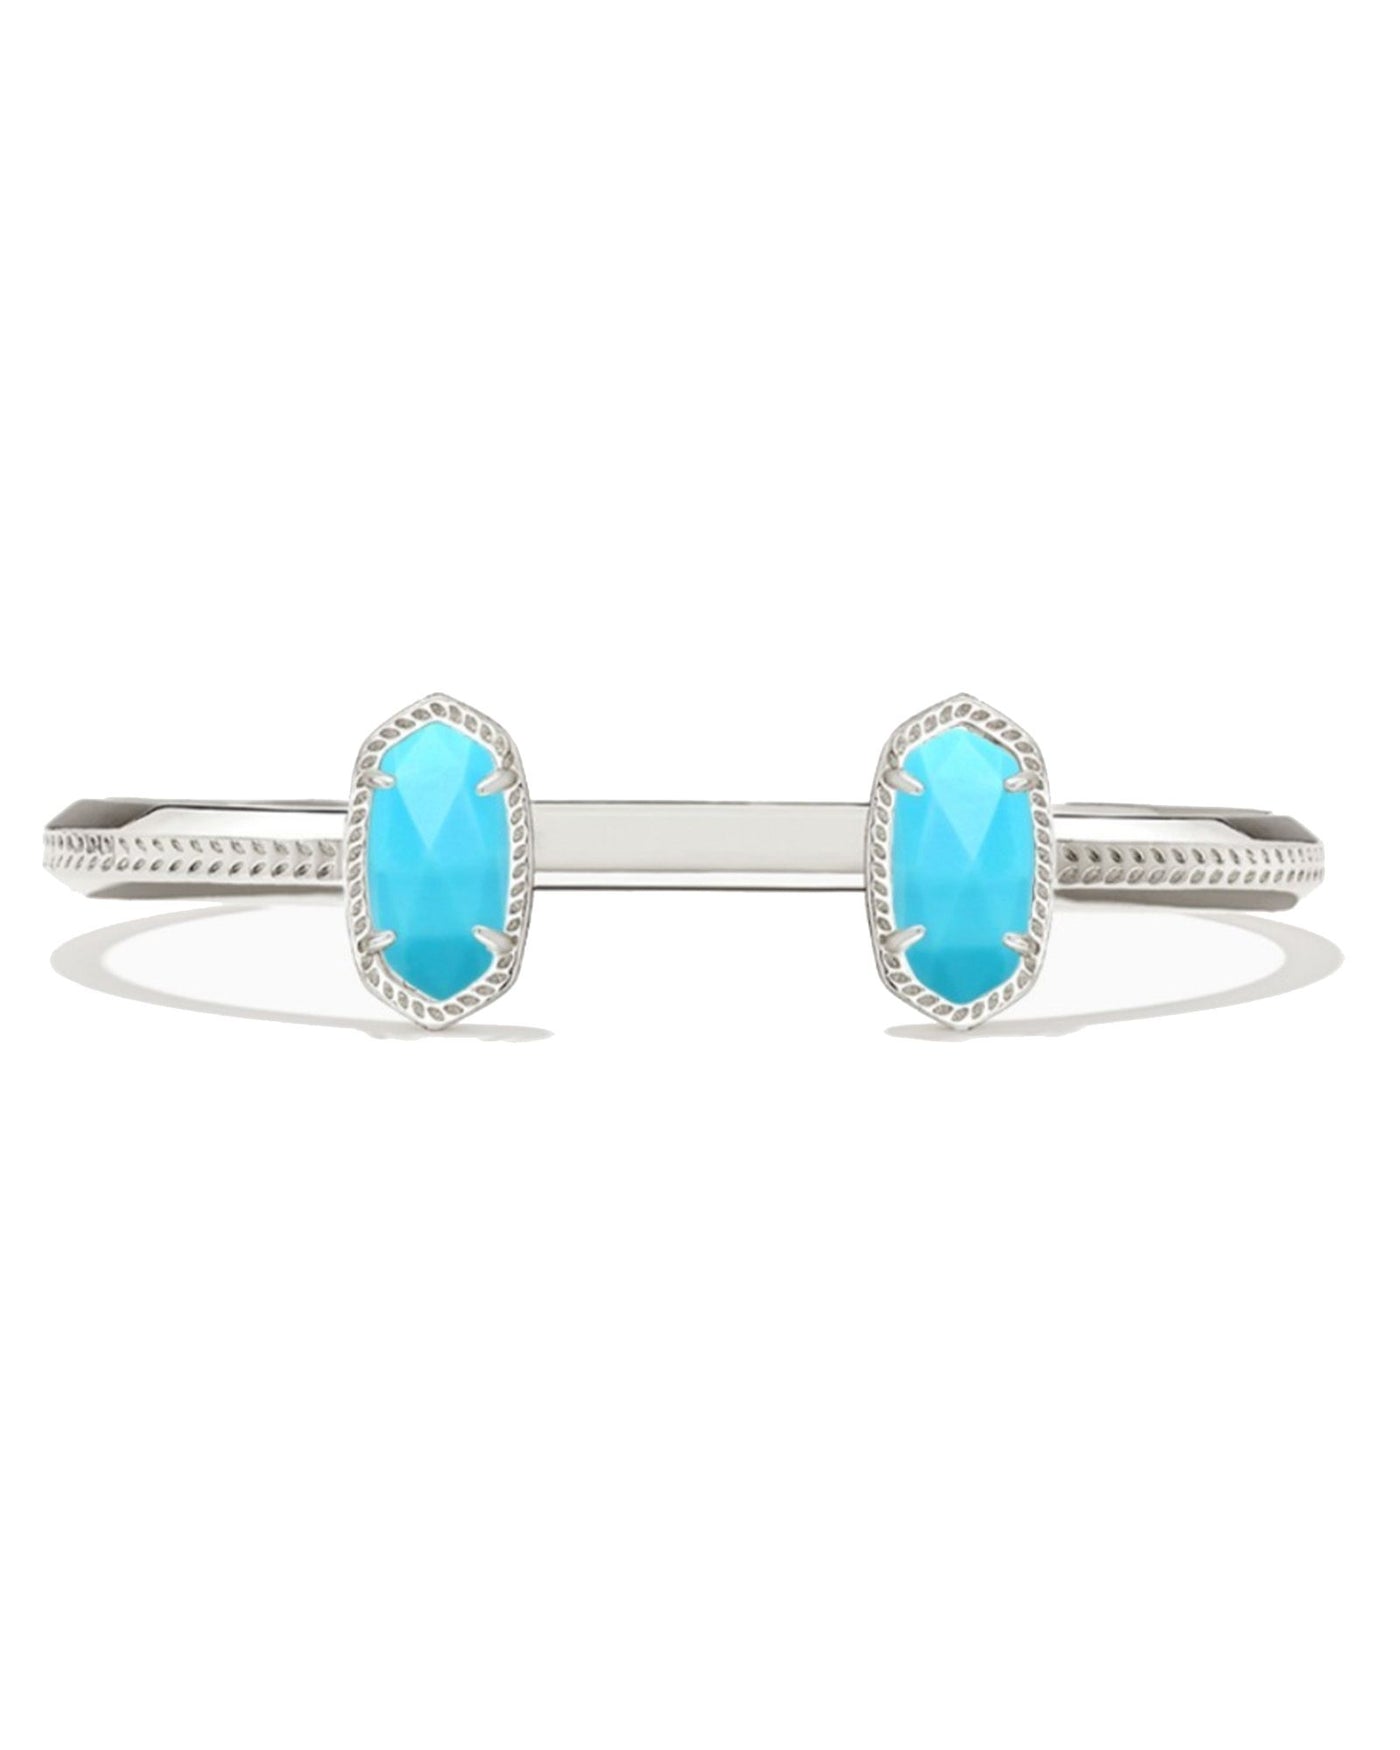 Kendra Scott Elton Silver Cuff Bracelets-Bracelets-Kendra Scott-Market Street Nest, Fashionable Clothing, Shoes and Home Décor Located in Mabank, TX